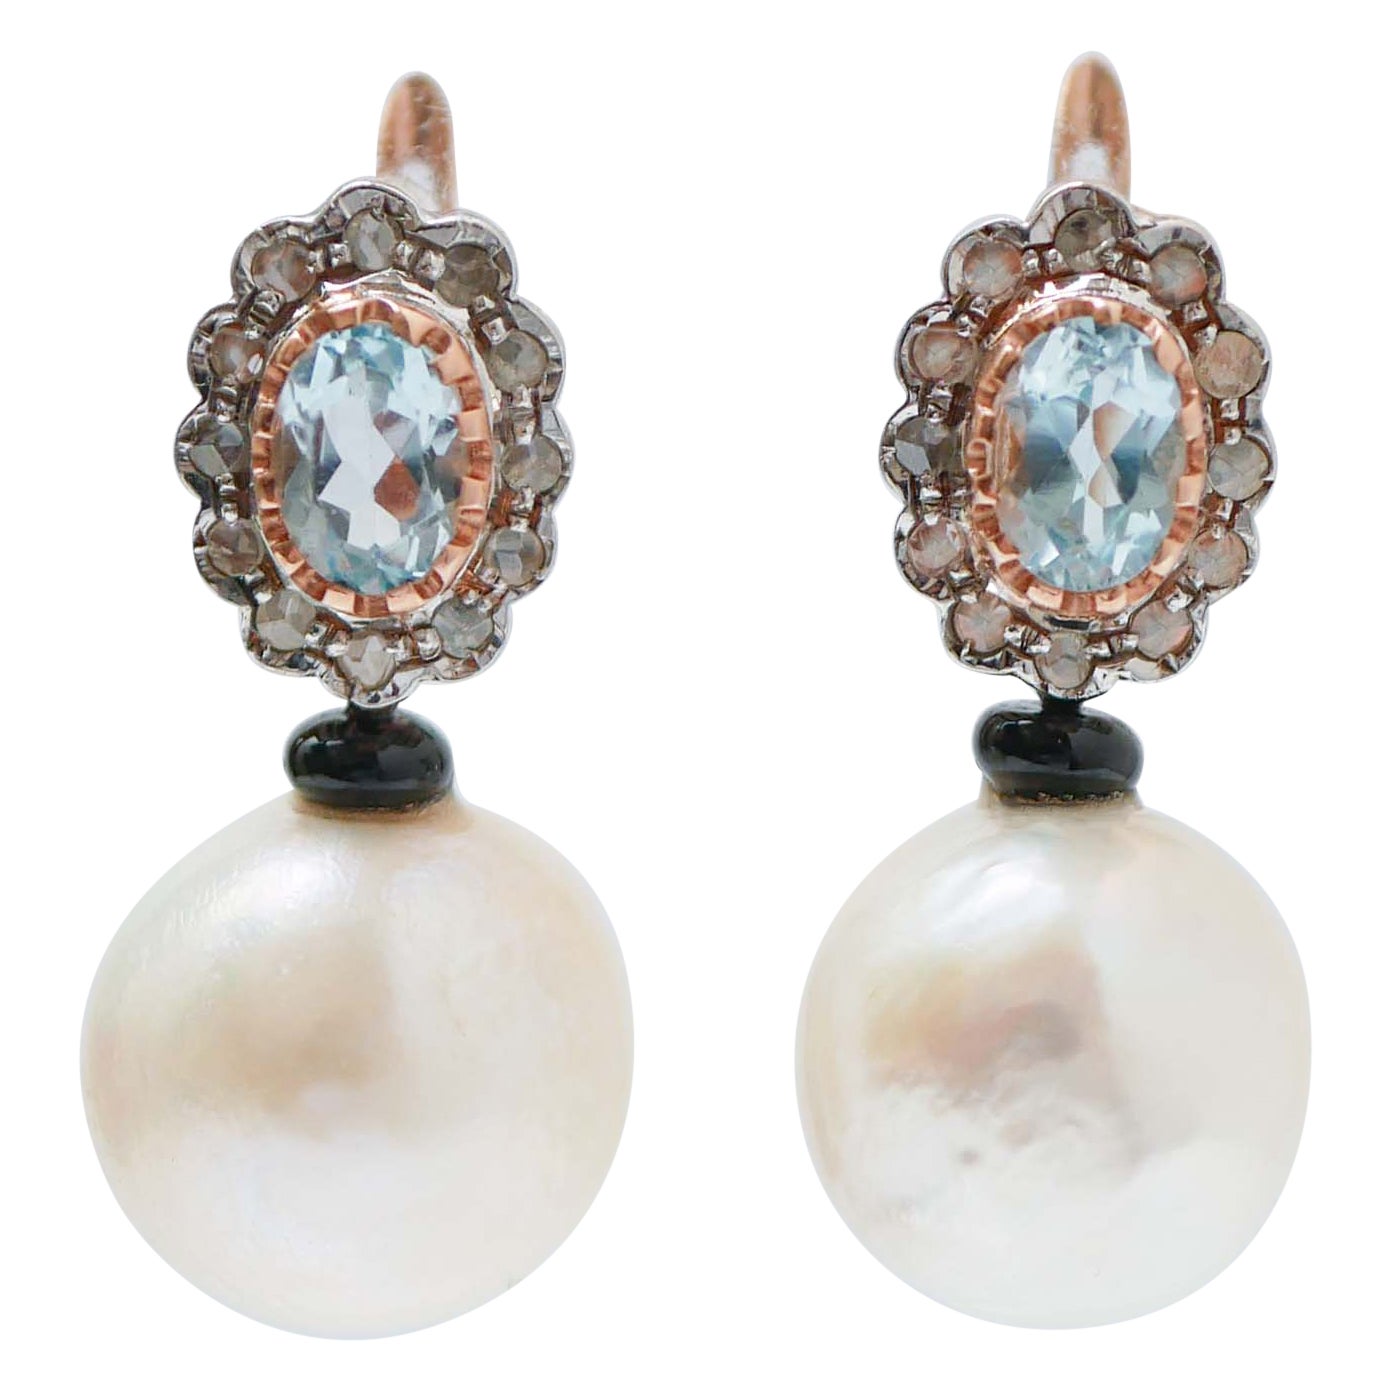 Pearls, Aquamarine Colour Topazs, Diamonds, Onyx, Rose Gold and Silver Earrings. For Sale